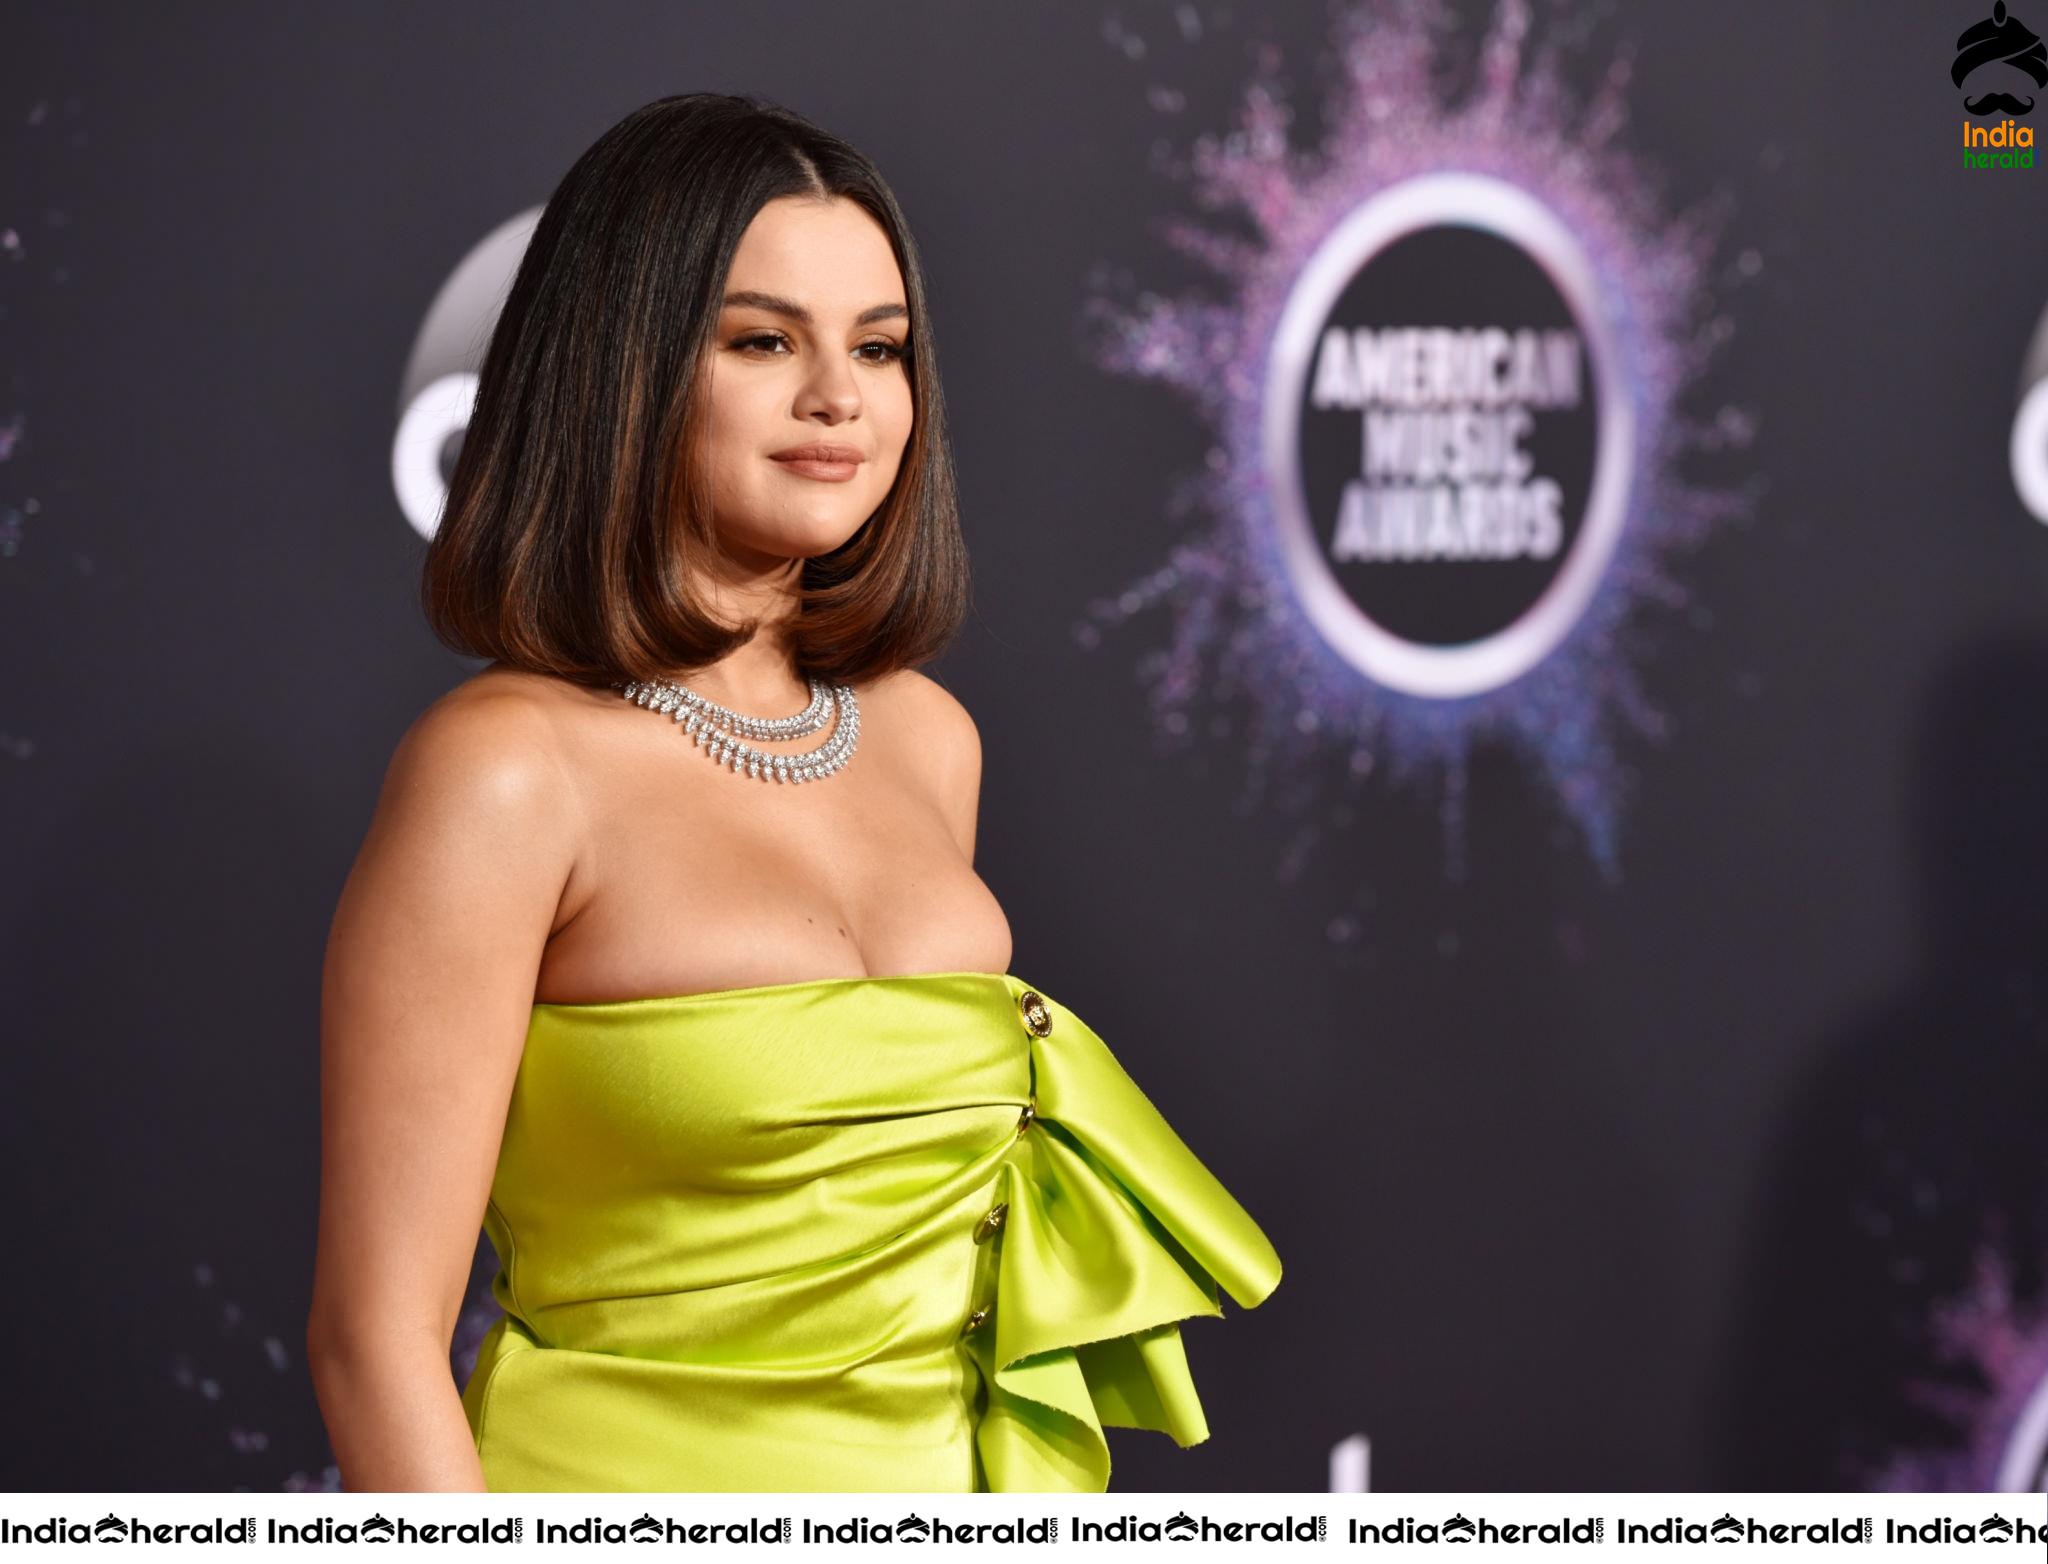 Sizzling Hot Selena Gomez shows her Hot Cleavage and Tempts us at AMC Awards Set 1